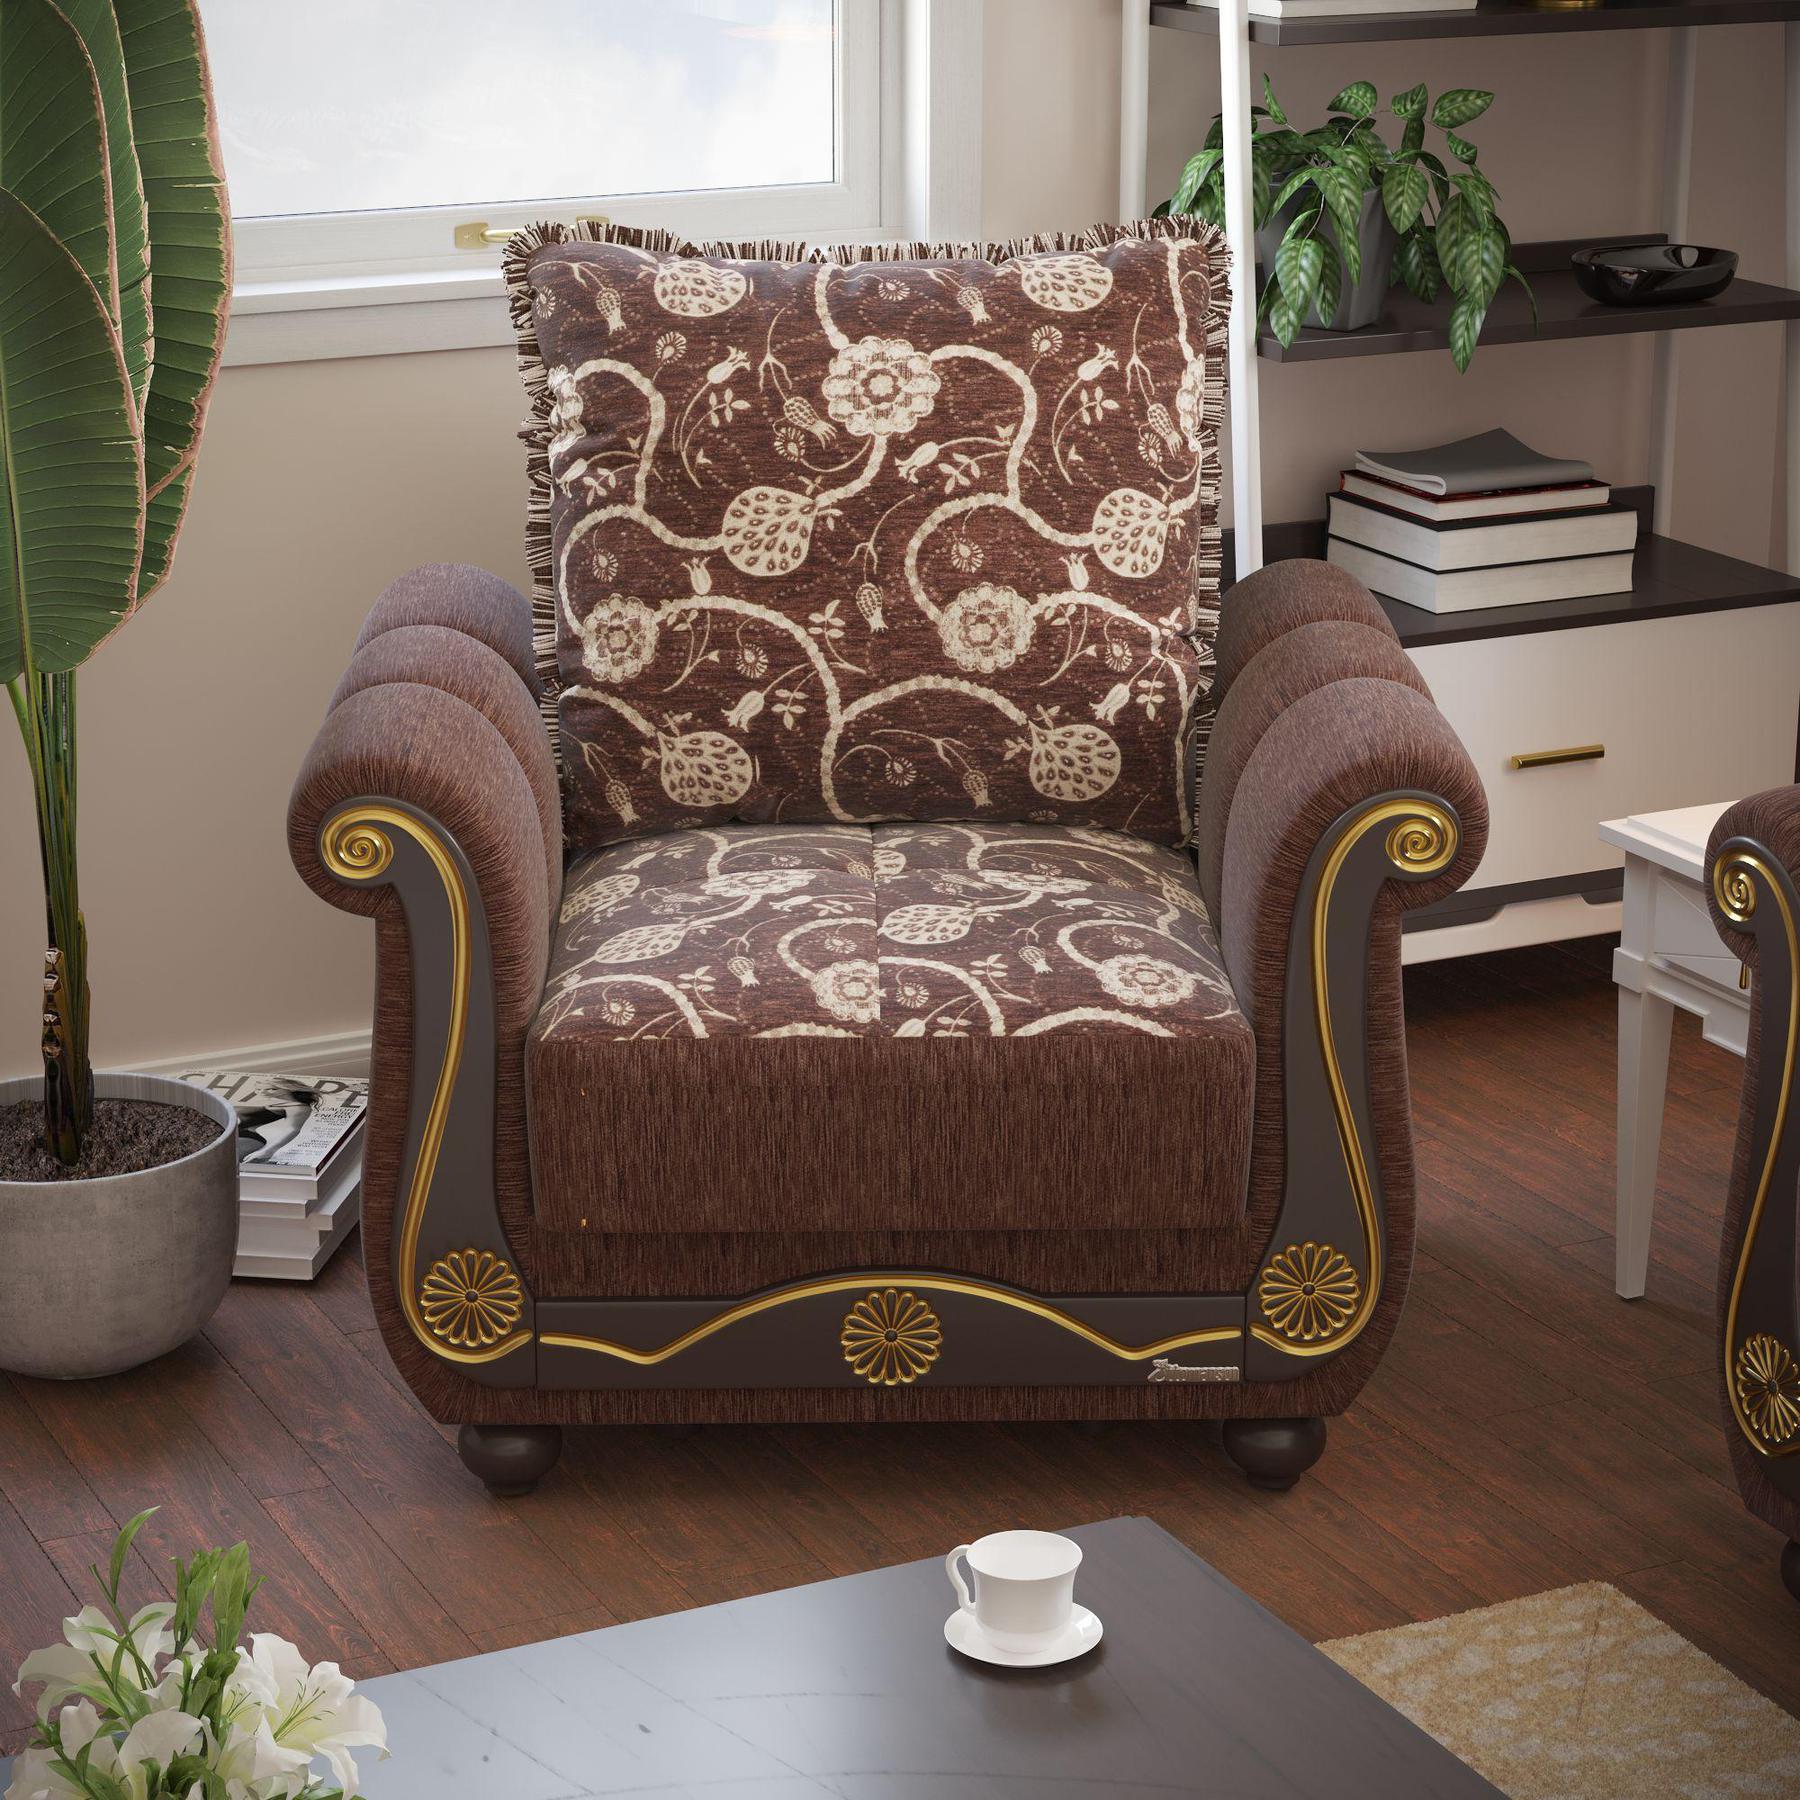 Lawson design, Royal Brown , Chenille upholstered convertible Armchair with underseat storage from Victoria by Ottomanson in living room lifestyle setting by itself. This Armchair measures 41 inches width by 40 inches depth by 40 inches height.